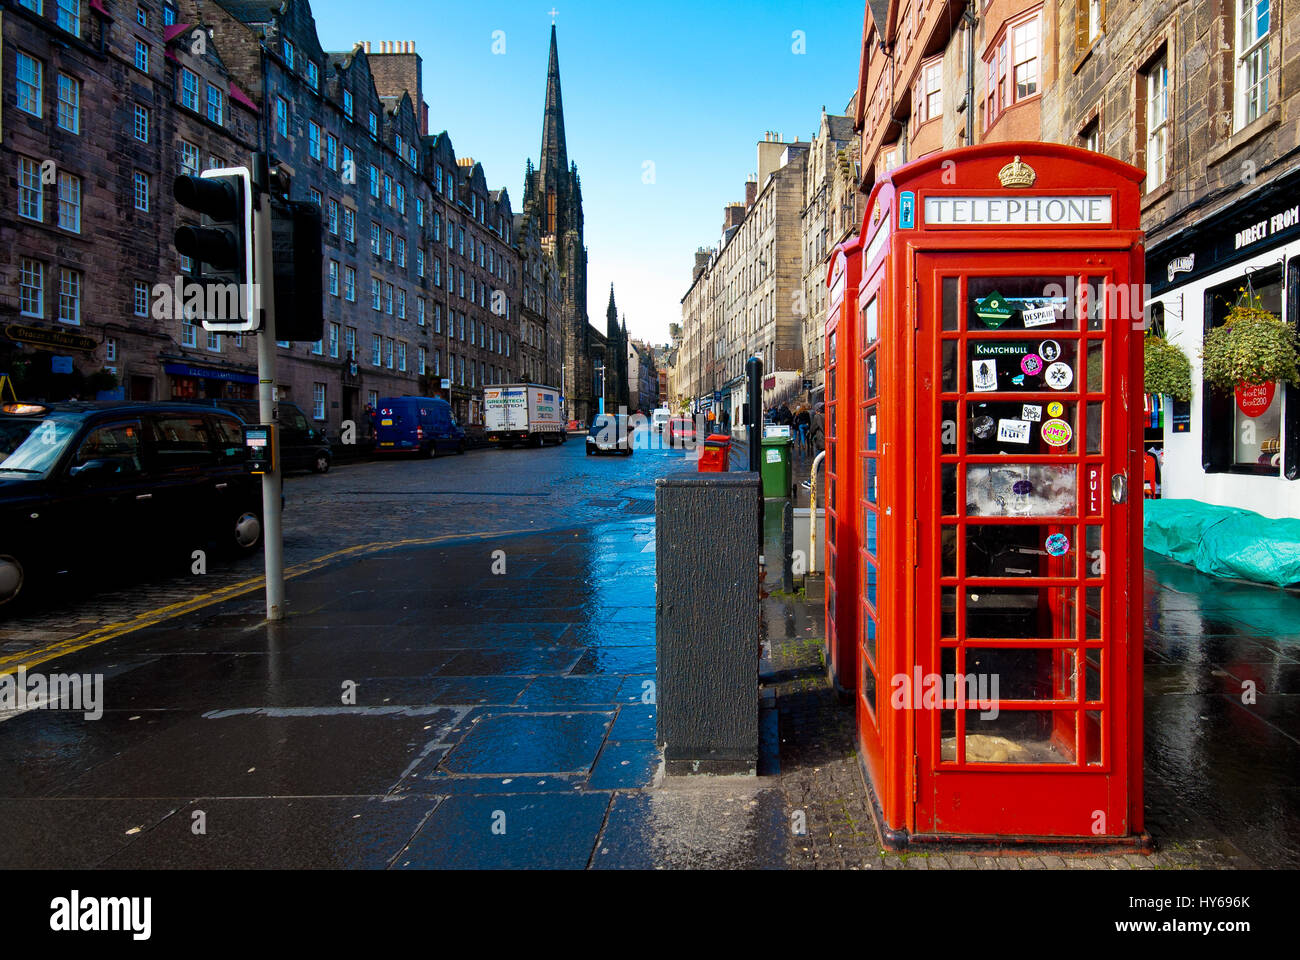 View of Edinburgh (Scotland) street and the red telephone booth in front. Stock Photo